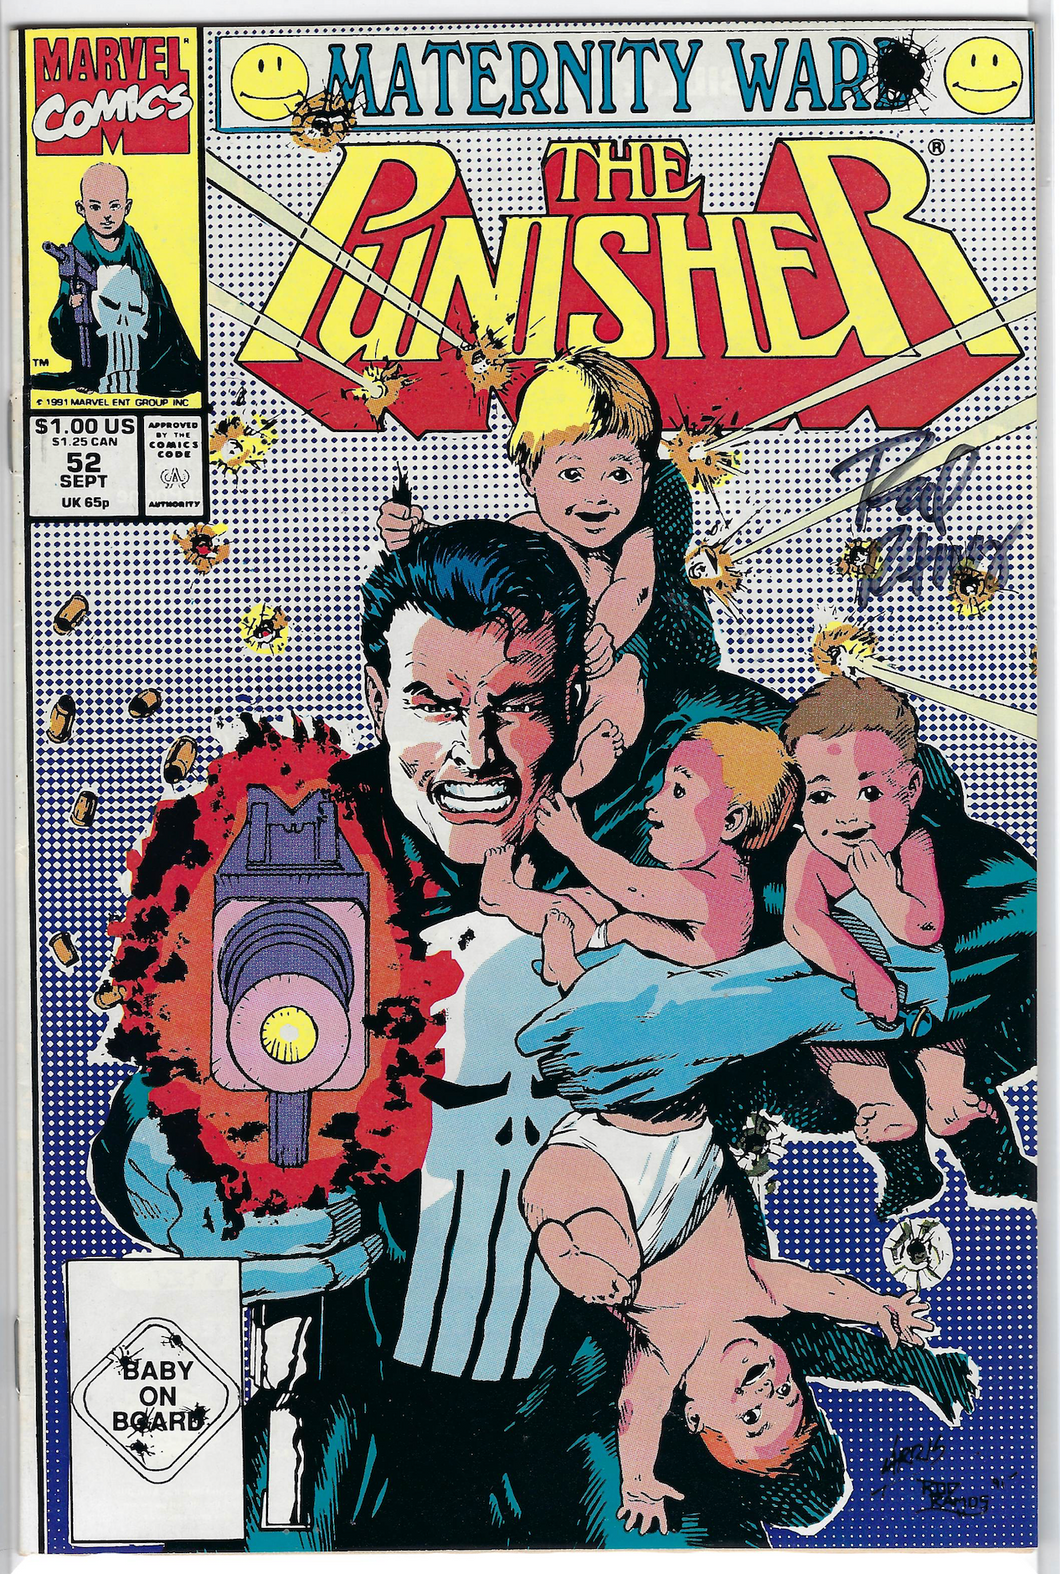 The Punisher #52 signed by Rodney Ramos